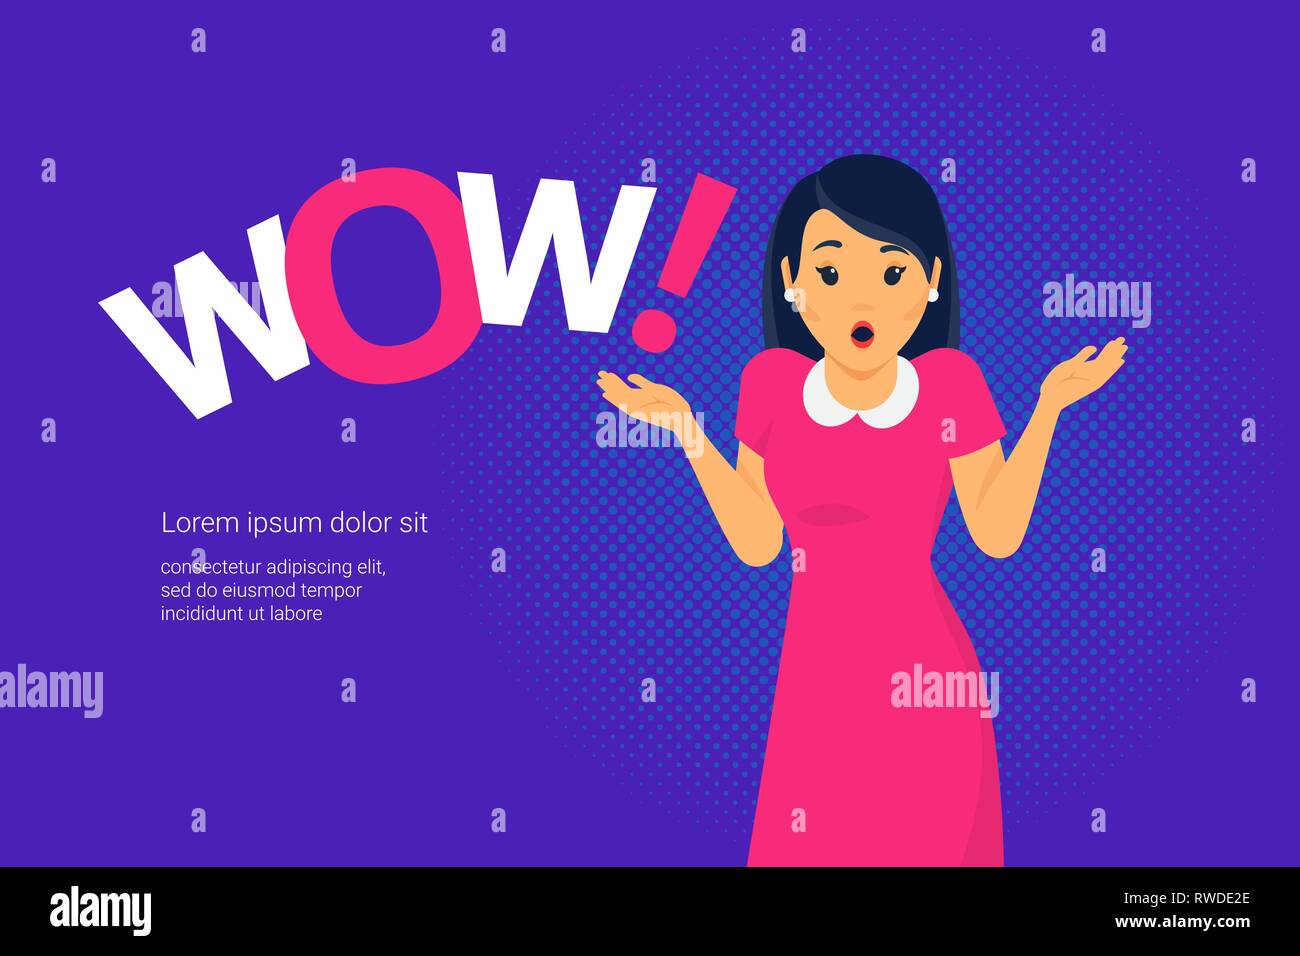 Wow emotion concept vector illustration of amazed young woman with open mouth making hands gesture standing near letters on purple. Woman wow effect e Stock Vector